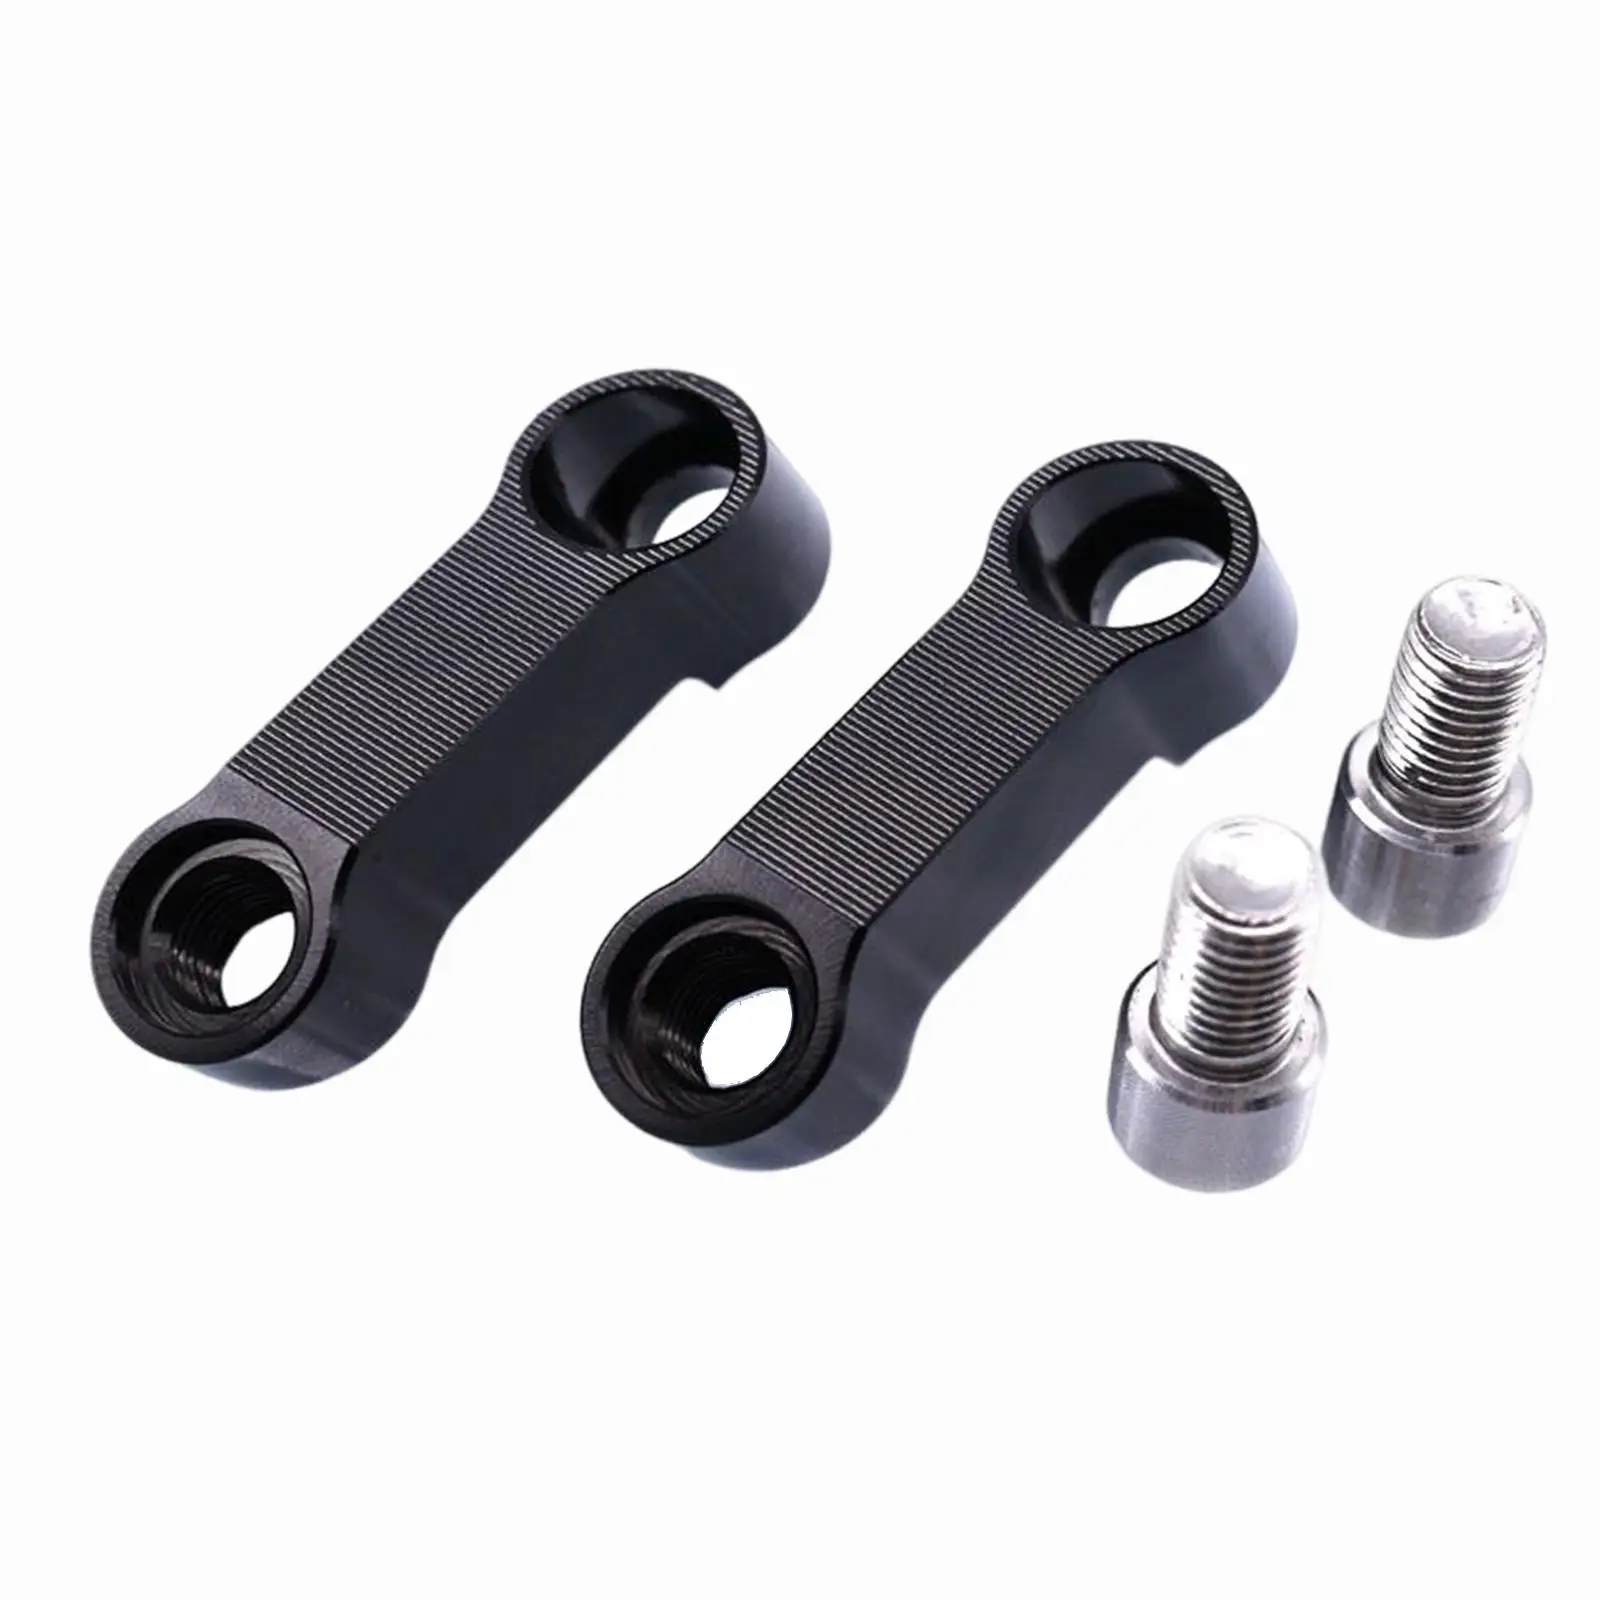 2, 10mm  Alloy  Adapter Kit Professional Accessories M10   Adapter